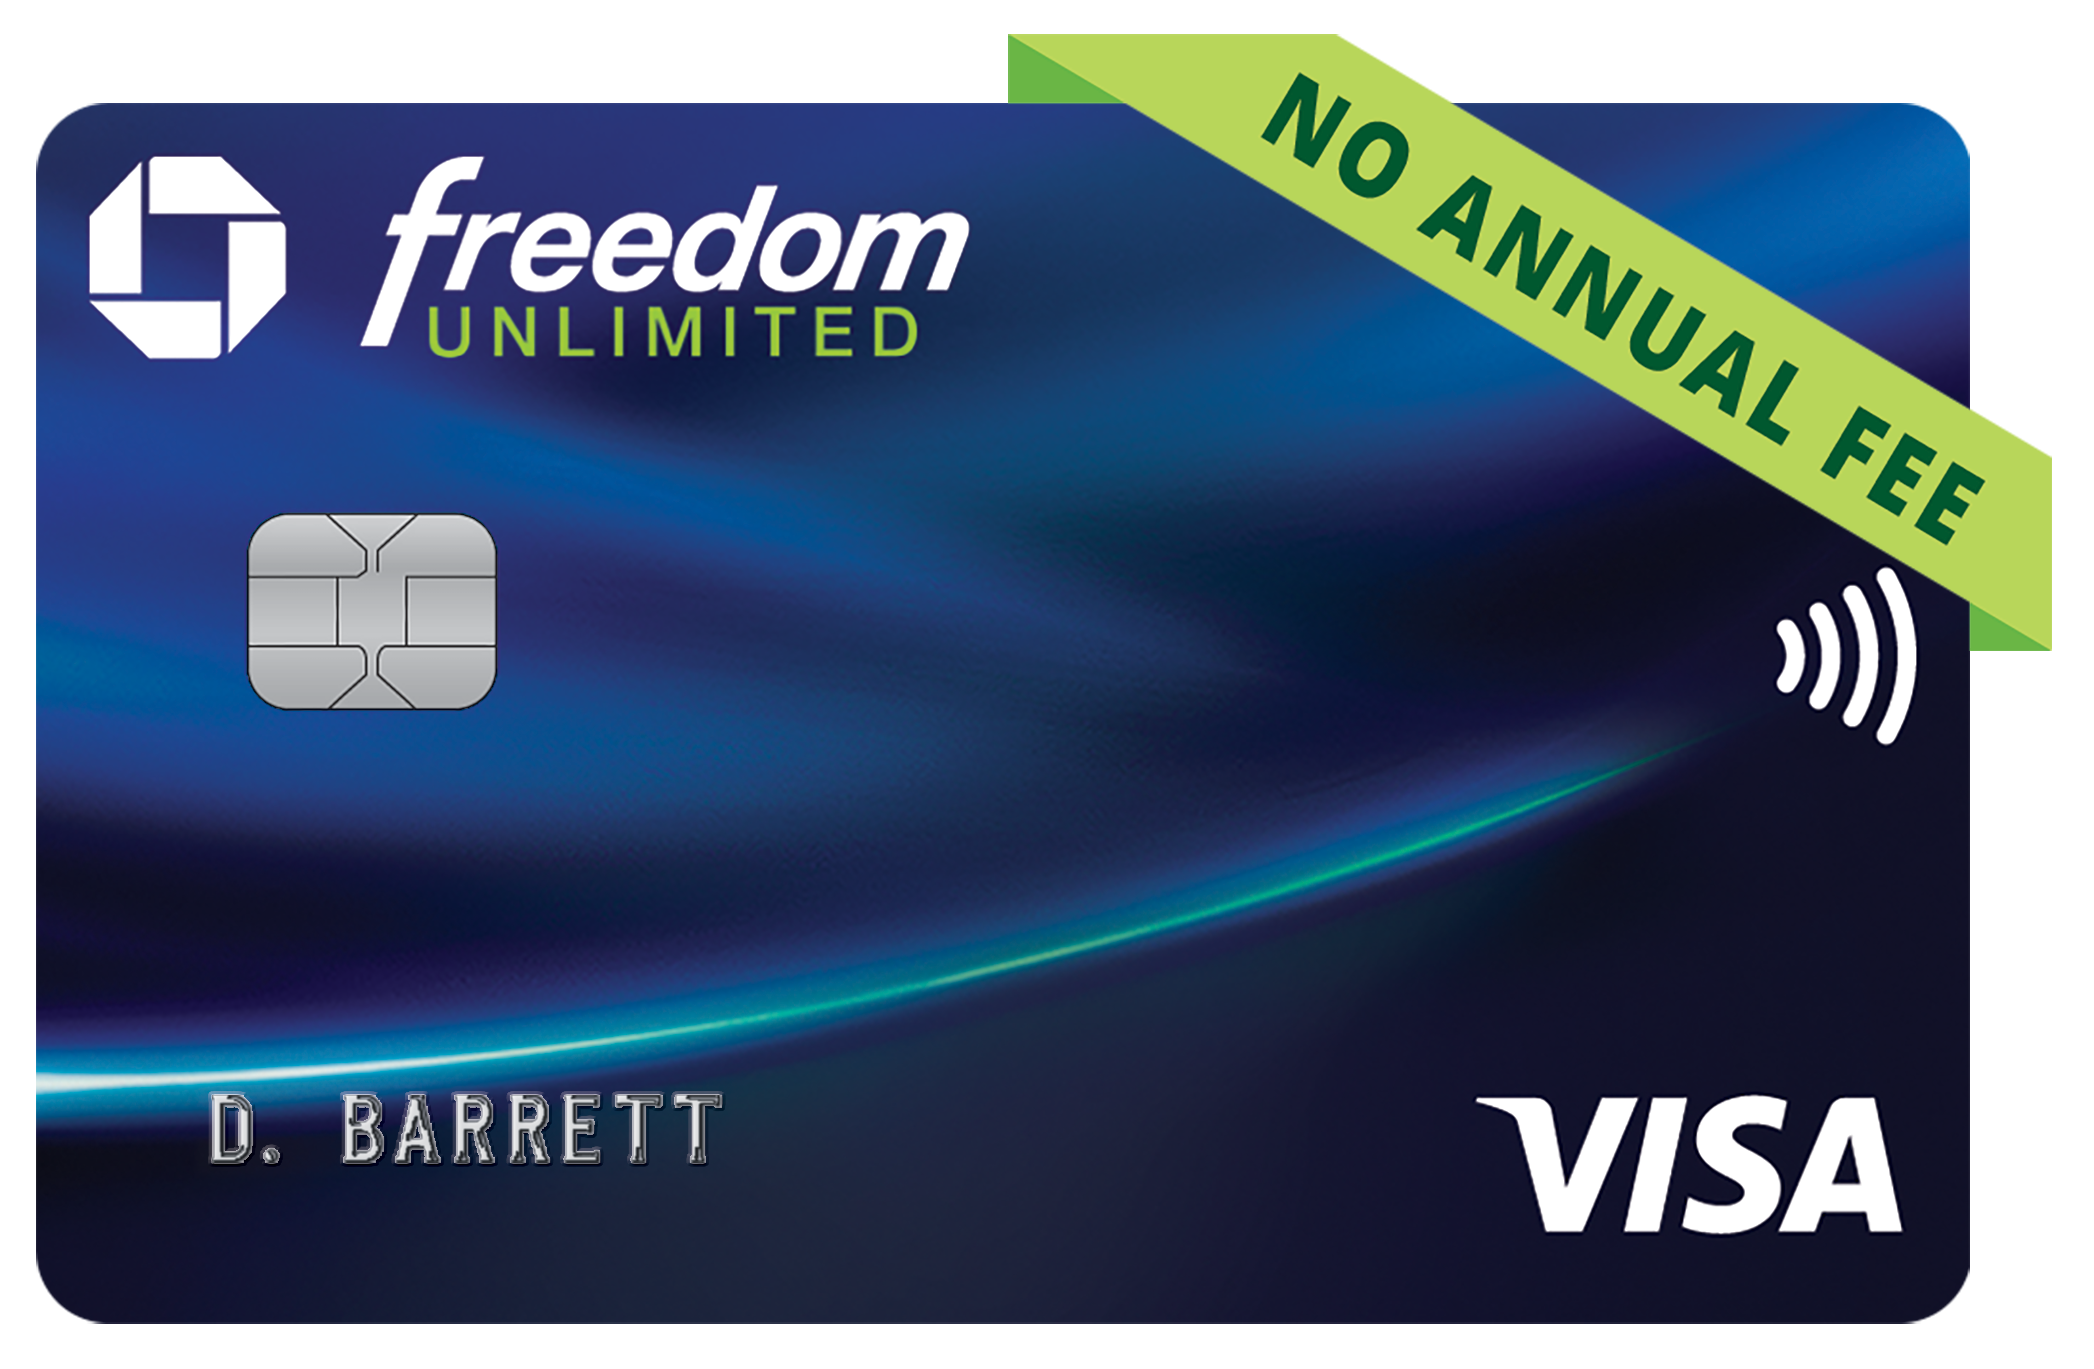 Chase Freedom Unlimited Visa Card